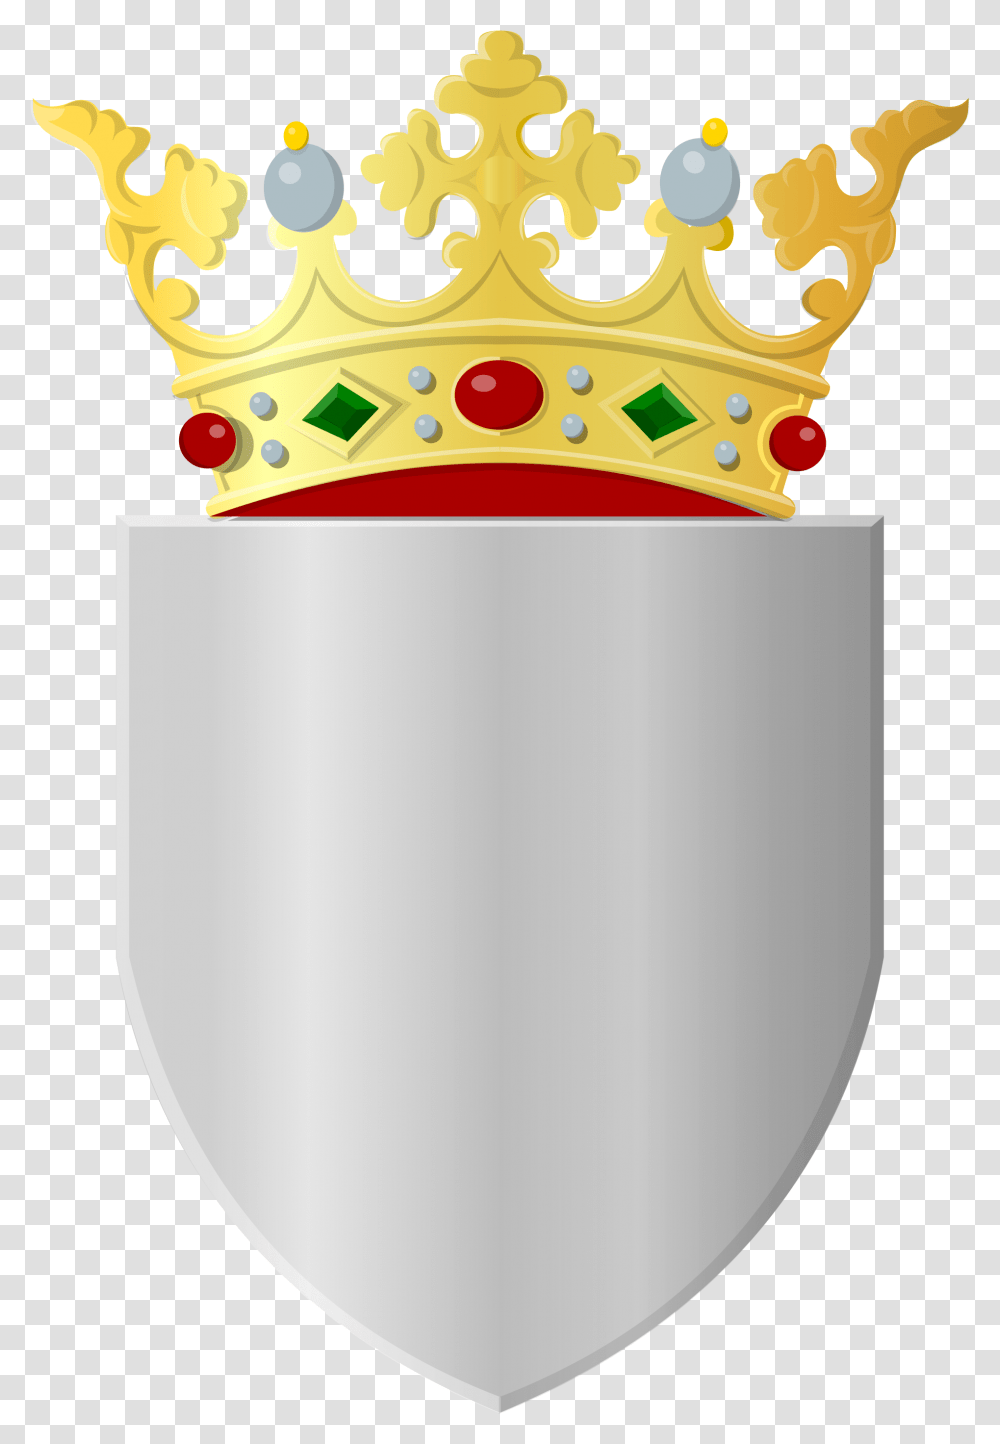 Filesilver Shield With Golden Crownsvg Wikimedia Commons Shield Crown, Jewelry, Accessories, Accessory, Snowman Transparent Png